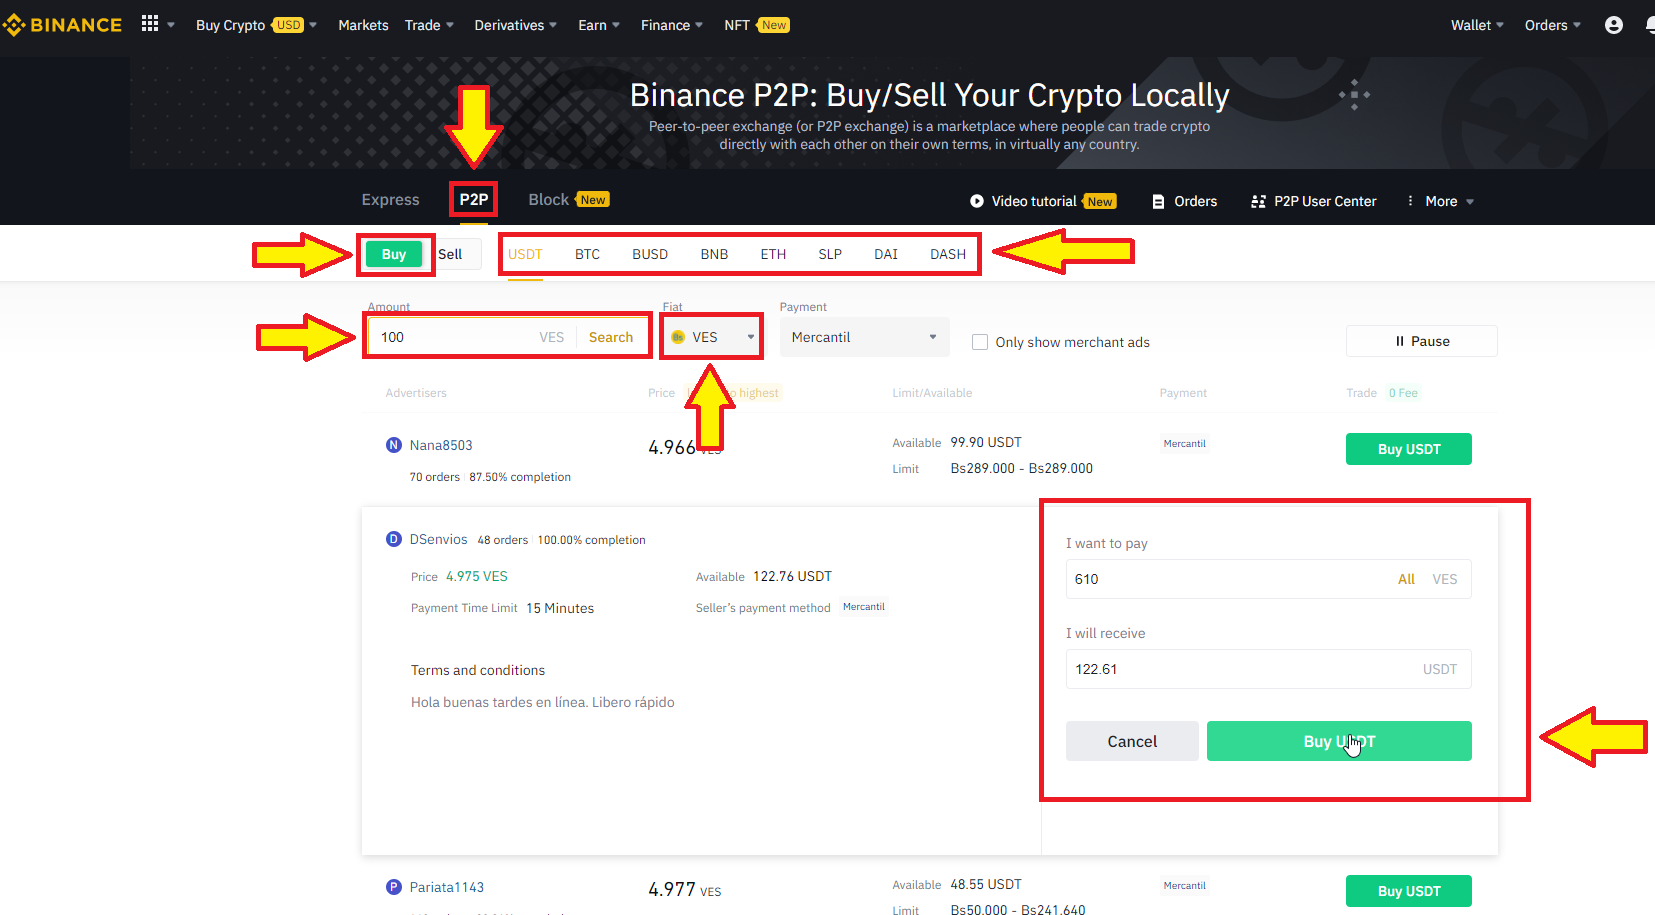 Buy Avalanche crypto in P2P with a verified account on Binance